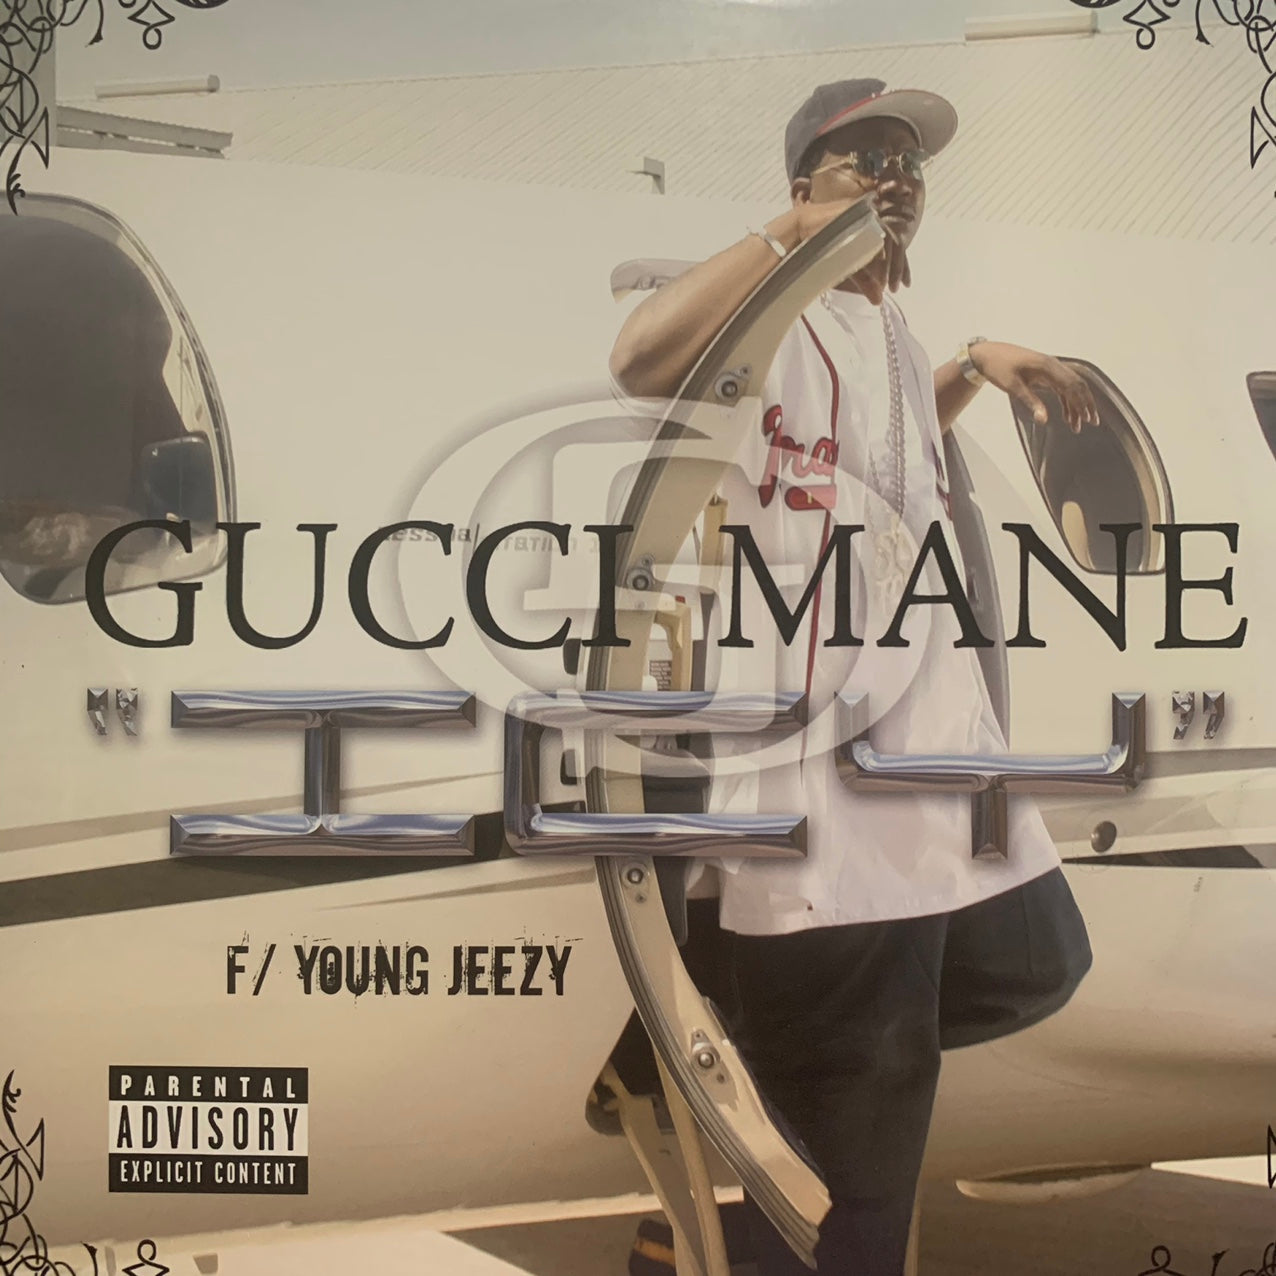 Gucci Mane Feat Young Jeezy “Icy” 5 Track 12inch